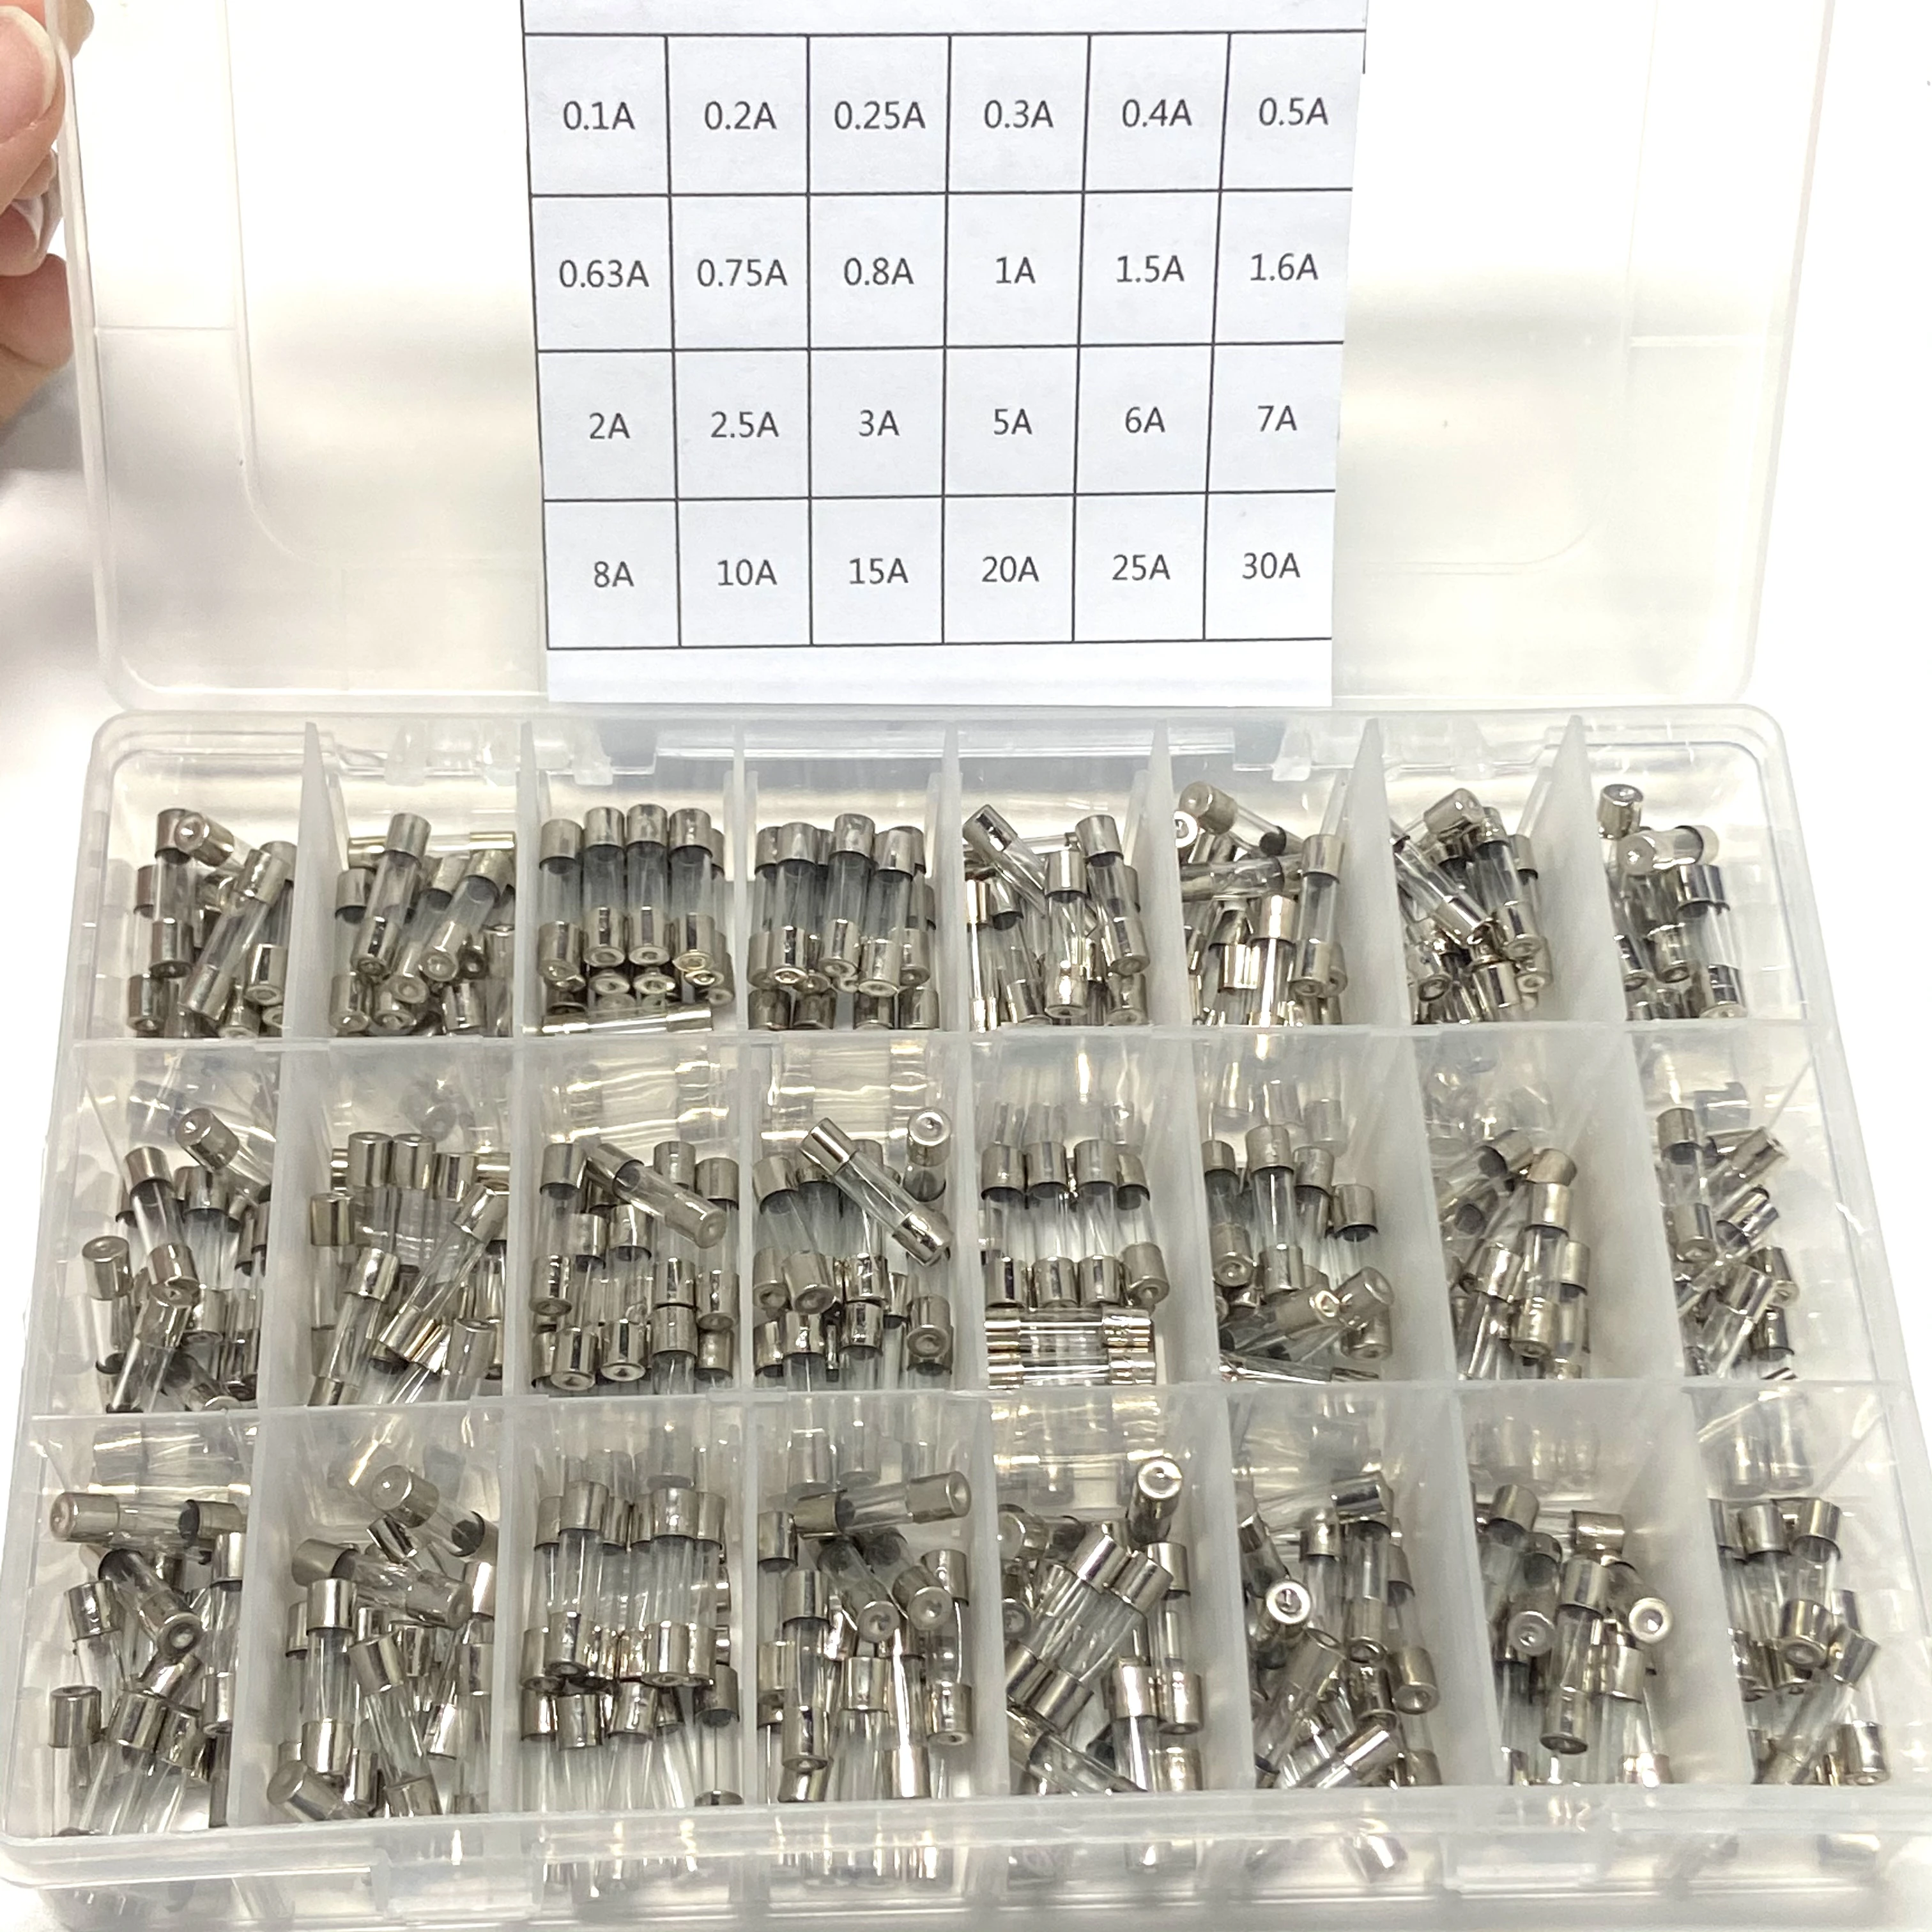 360Pcs 5x20mm Glass Tube Fuse Quick Blow Glass Tube Fuse Assorted Kits Fast-blow Glass Fuses 0.1A-30A 24values 10pcs 5 20 fast blow glass fuses assorted kit 5 20mm 250v 0 5a 1a 2a 3a 5a 8a 10a 15a 20a 25a 30a amp tube fuses 5x20mm